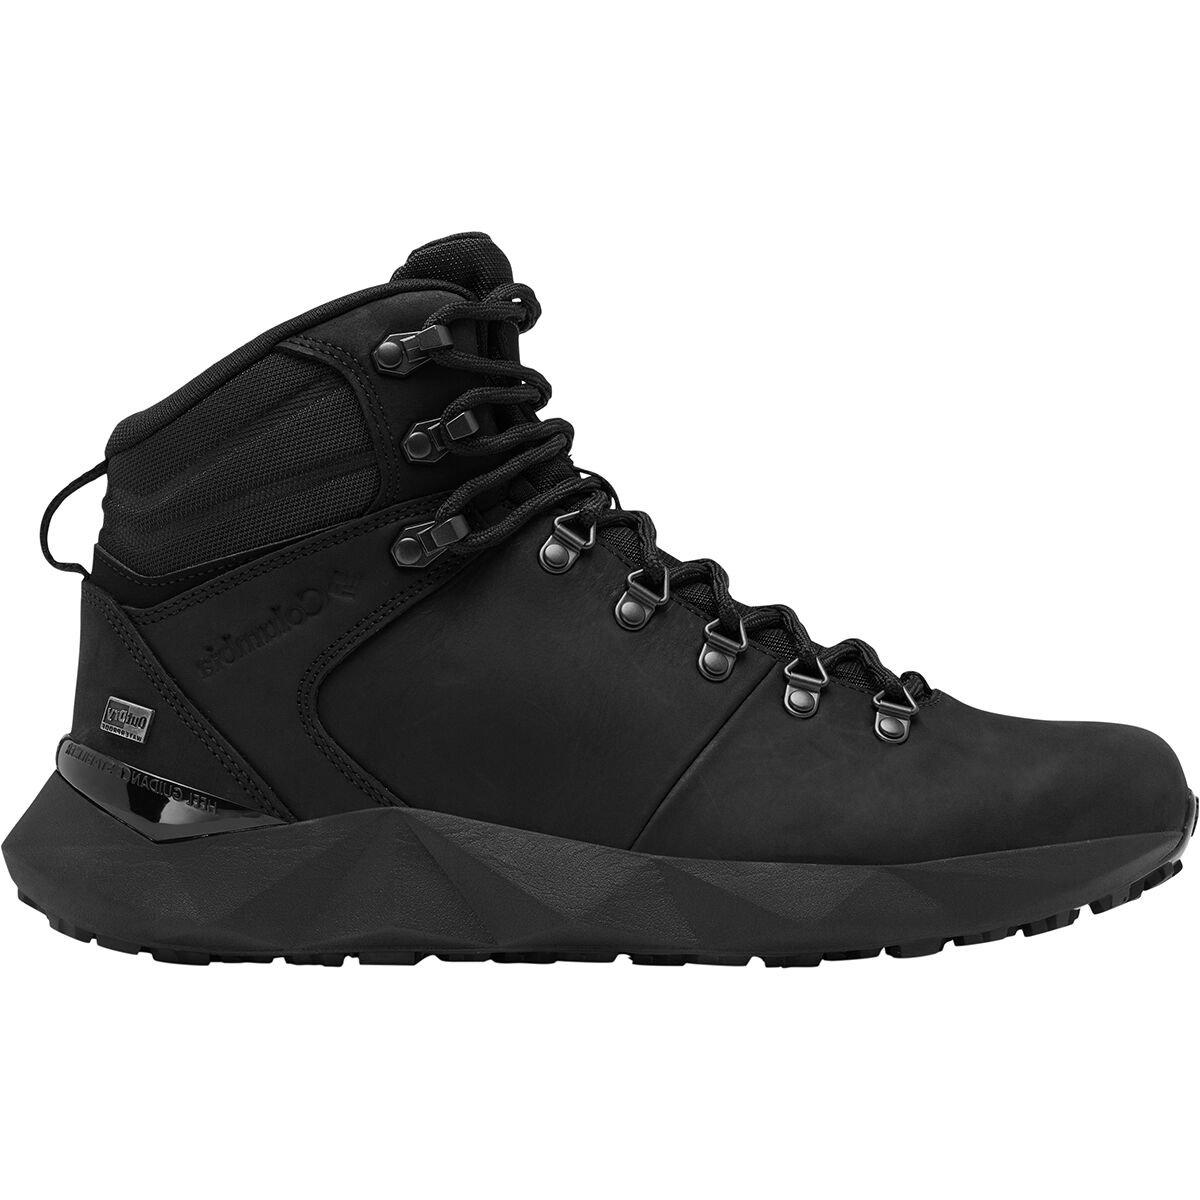 Columbia Facet Sierra Outdry Hiking Boot - Men's